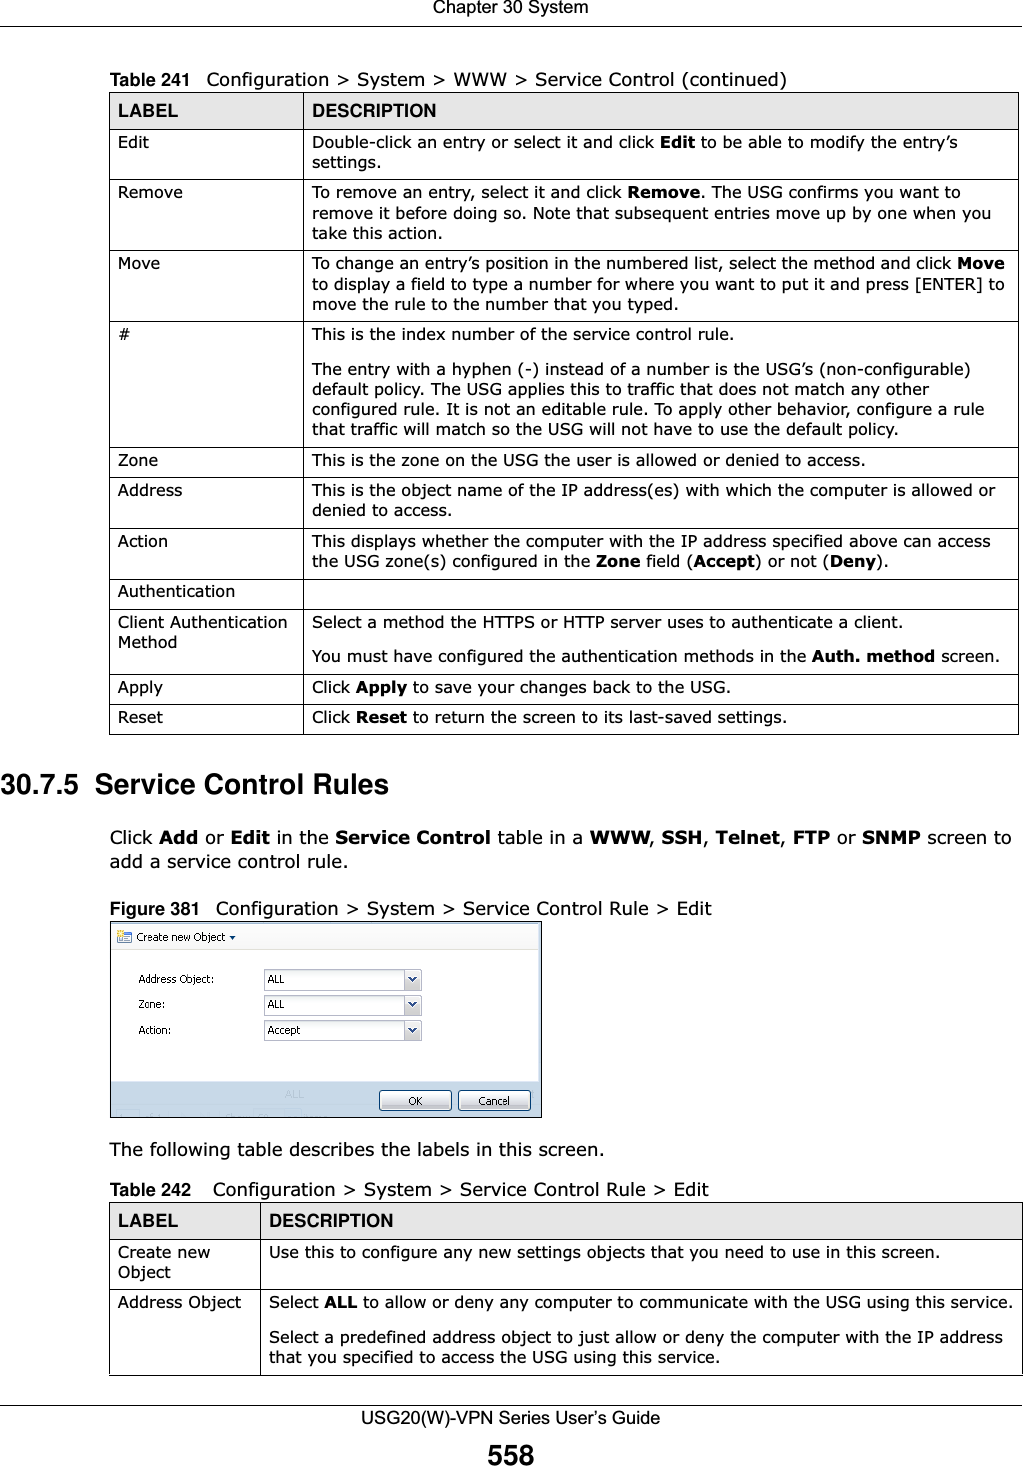 Chapter 30 SystemUSG20(W)-VPN Series User’s Guide55830.7.5  Service Control RulesClick Add or Edit in the Service Control table in a WWW, SSH, Telnet, FTP or SNMP screen to add a service control rule. Figure 381   Configuration &gt; System &gt; Service Control Rule &gt; Edit   The following table describes the labels in this screen.  Edit Double-click an entry or select it and click Edit to be able to modify the entry’s settings. Remove To remove an entry, select it and click Remove. The USG confirms you want to remove it before doing so. Note that subsequent entries move up by one when you take this action.Move To change an entry’s position in the numbered list, select the method and click Move to display a field to type a number for where you want to put it and press [ENTER] to move the rule to the number that you typed.#This is the index number of the service control rule.The entry with a hyphen (-) instead of a number is the USG’s (non-configurable) default policy. The USG applies this to traffic that does not match any other configured rule. It is not an editable rule. To apply other behavior, configure a rule that traffic will match so the USG will not have to use the default policy.Zone This is the zone on the USG the user is allowed or denied to access.Address This is the object name of the IP address(es) with which the computer is allowed or denied to access.Action This displays whether the computer with the IP address specified above can access the USG zone(s) configured in the Zone field (Accept) or not (Deny).AuthenticationClient Authentication MethodSelect a method the HTTPS or HTTP server uses to authenticate a client.You must have configured the authentication methods in the Auth. method screen.Apply Click Apply to save your changes back to the USG. Reset Click Reset to return the screen to its last-saved settings. Table 241   Configuration &gt; System &gt; WWW &gt; Service Control (continued)LABEL DESCRIPTIONTable 242    Configuration &gt; System &gt; Service Control Rule &gt; EditLABEL DESCRIPTIONCreate new ObjectUse this to configure any new settings objects that you need to use in this screen.Address Object Select ALL to allow or deny any computer to communicate with the USG using this service.Select a predefined address object to just allow or deny the computer with the IP address that you specified to access the USG using this service.